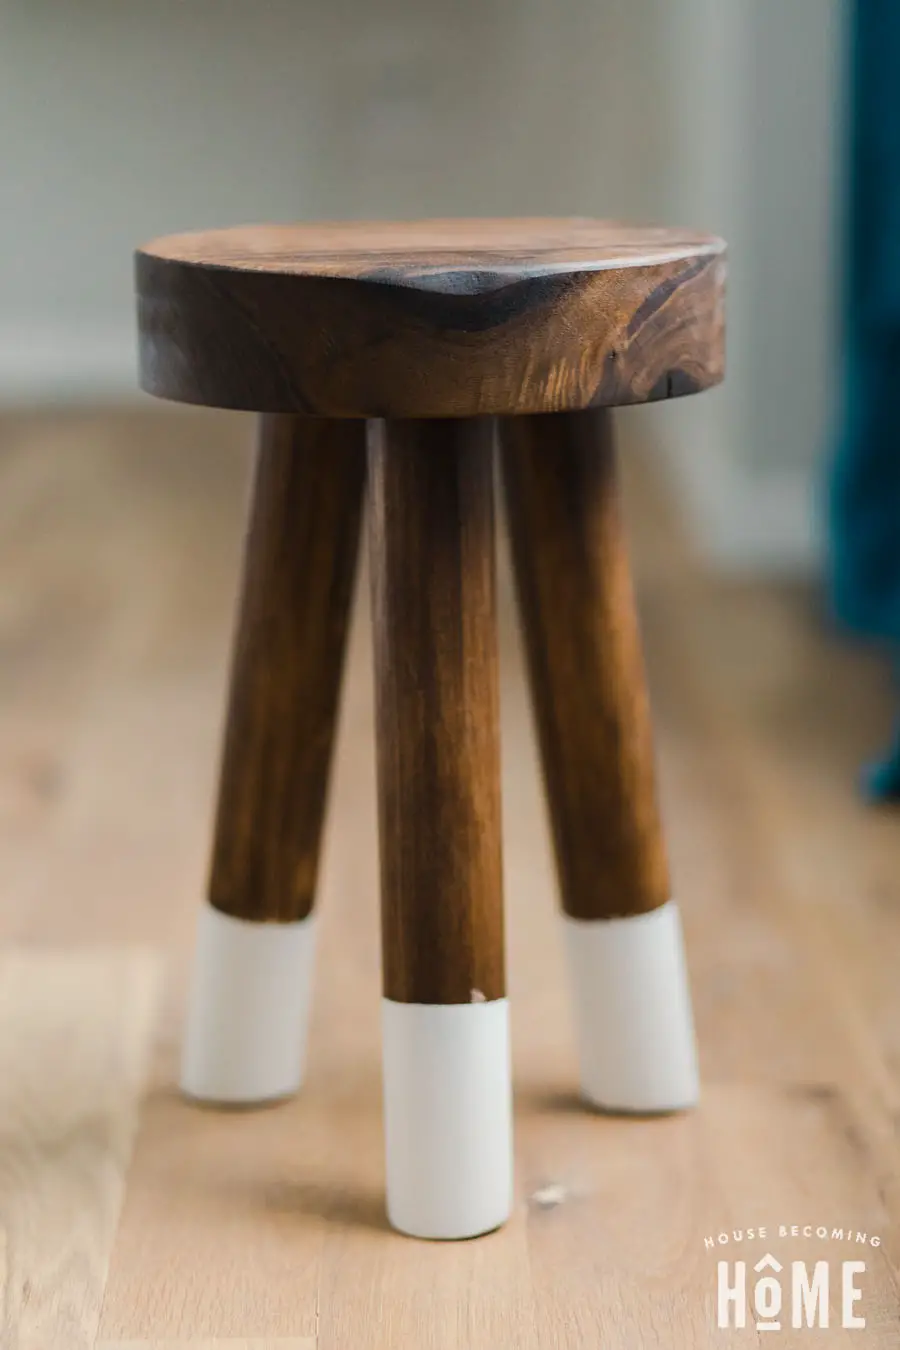 DIY Stool With Chunky Walnut Top and 11 Degree Angled Leg Mounting Plates